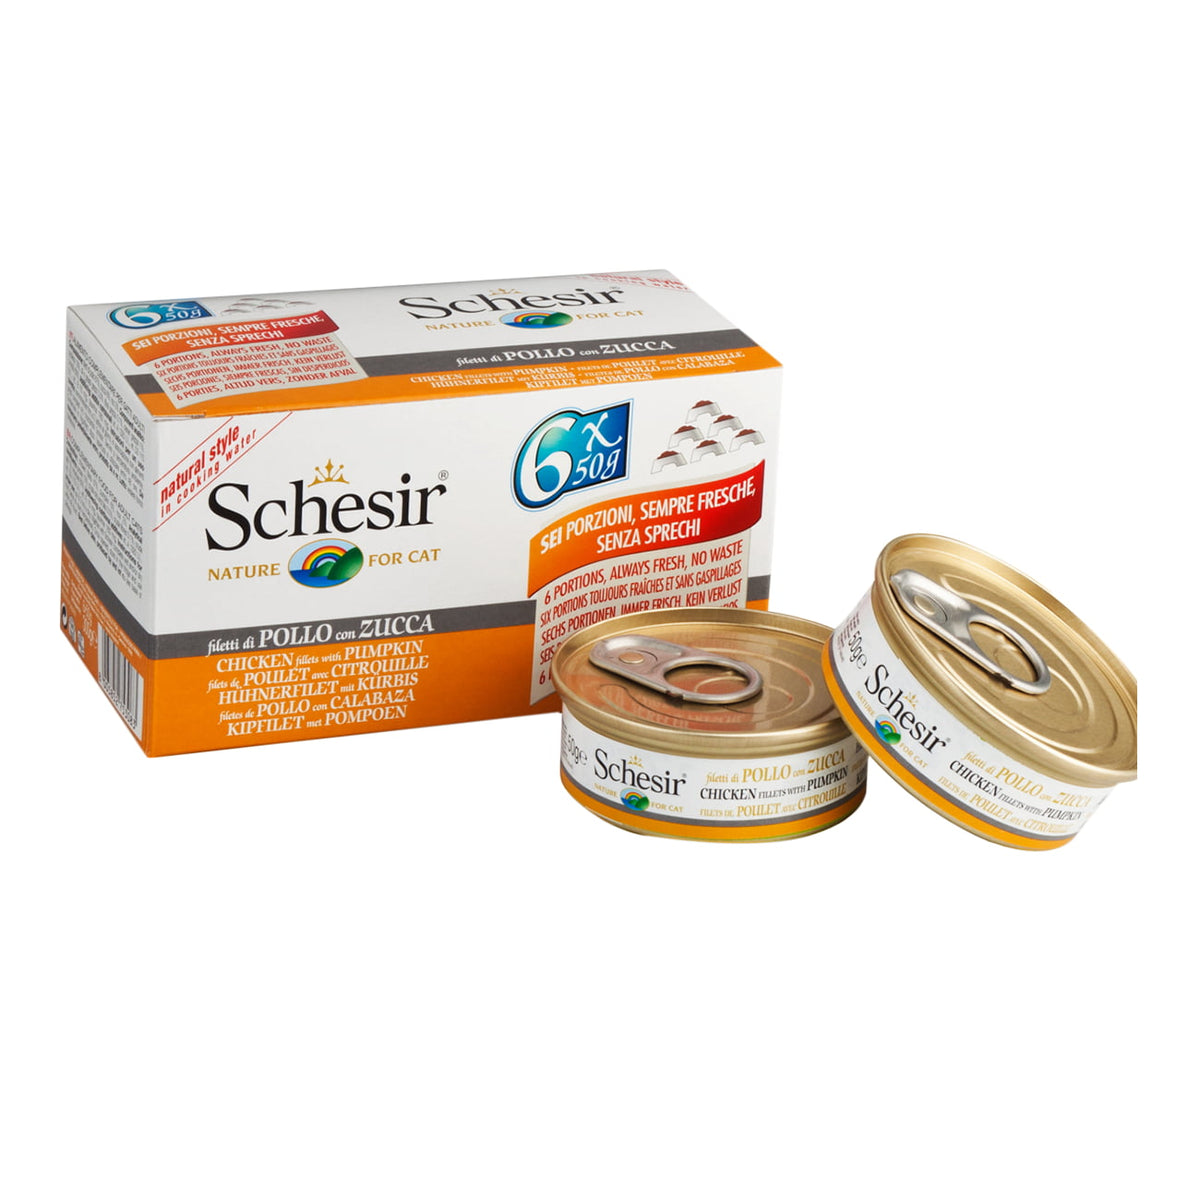 Schesir Chicken Fillets with Pumpkin - 6 Pack of Wet Canned Cat Food (6 x 50g)